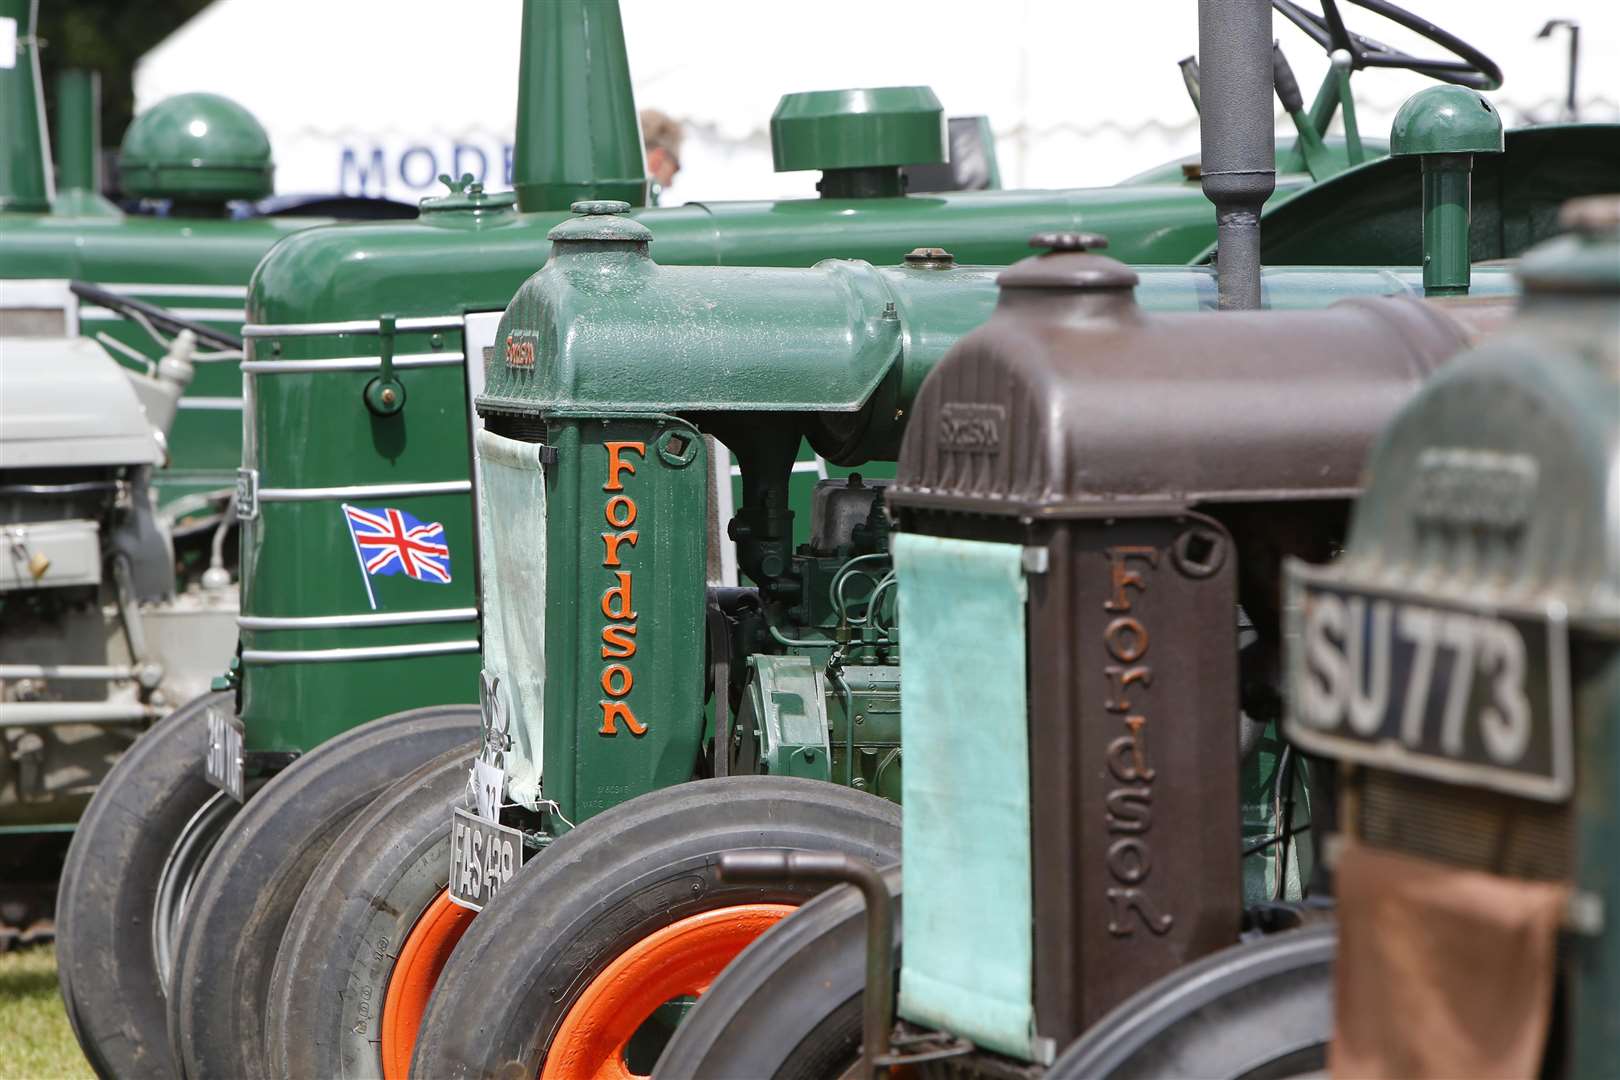 Haynes Agricultural has sold tractors for 100 years - like some of these vintage models on display at last year's Kent Show